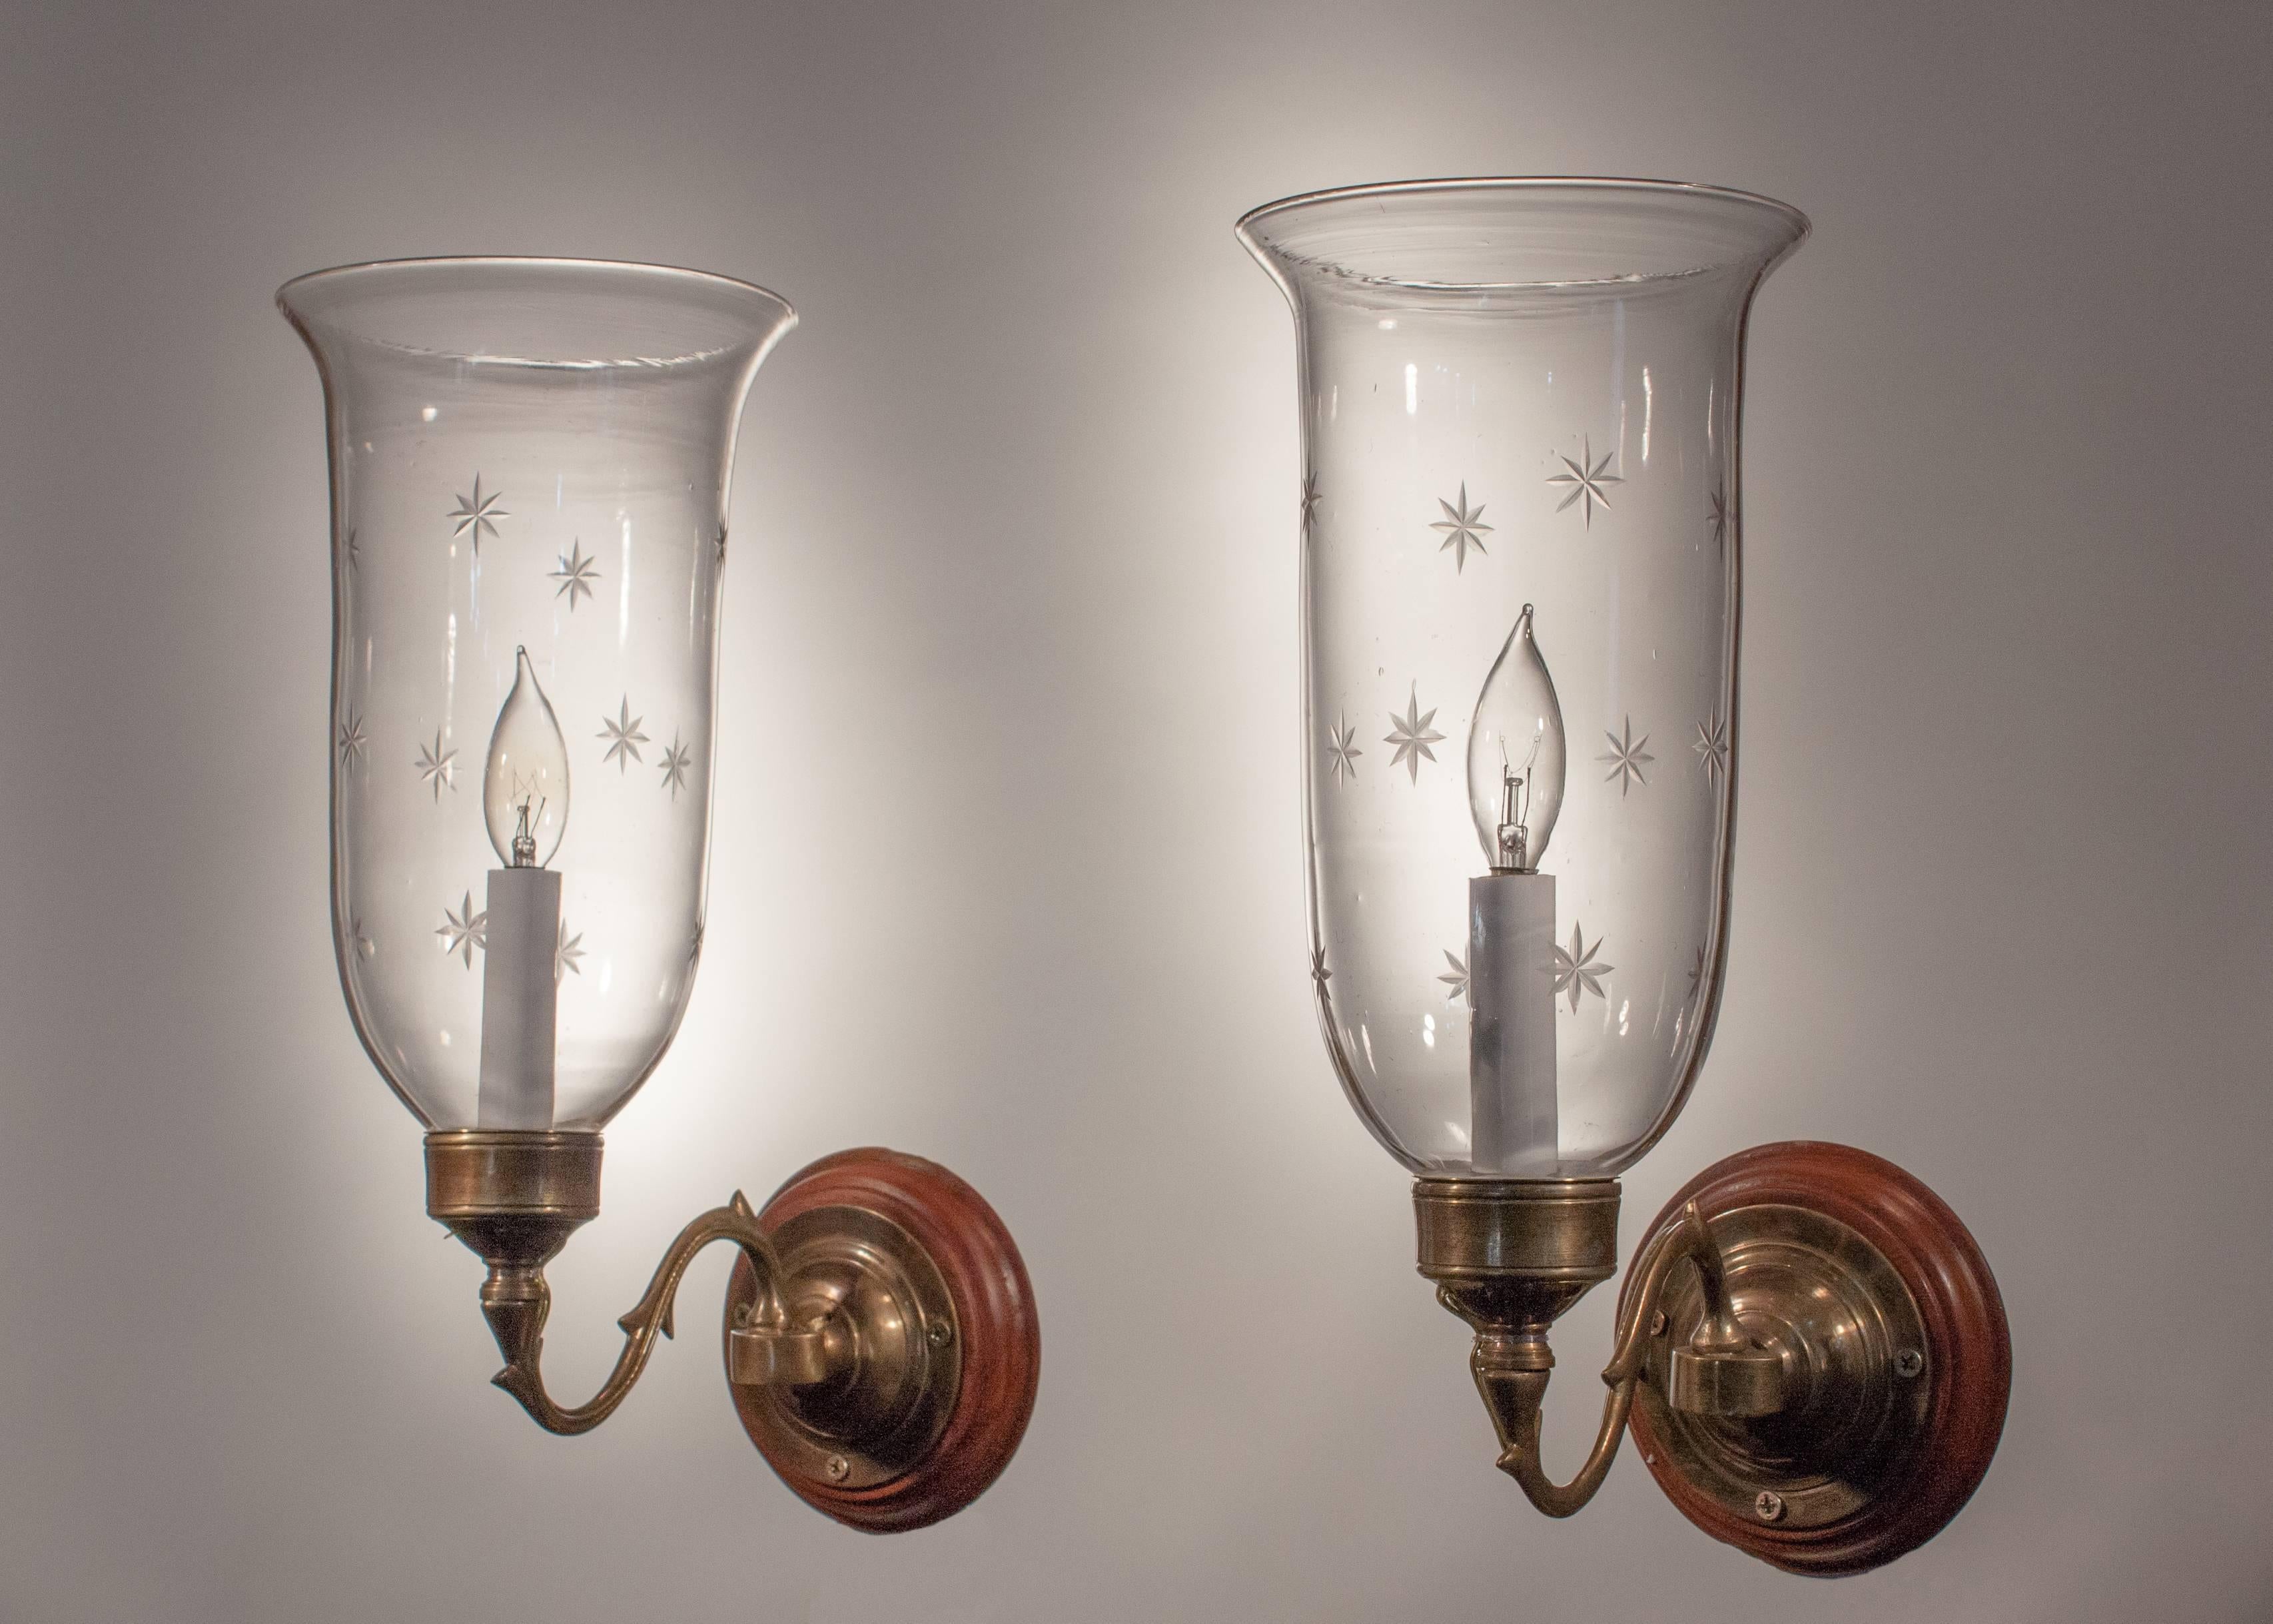 Lovely pair of 19th century English hand blown glass sconce shades with delicately flared form and fine star etching. These classic wall sconces are newly electrified, each using a single candelabra bulb up to 60 watts. Toned brass sconce arms and